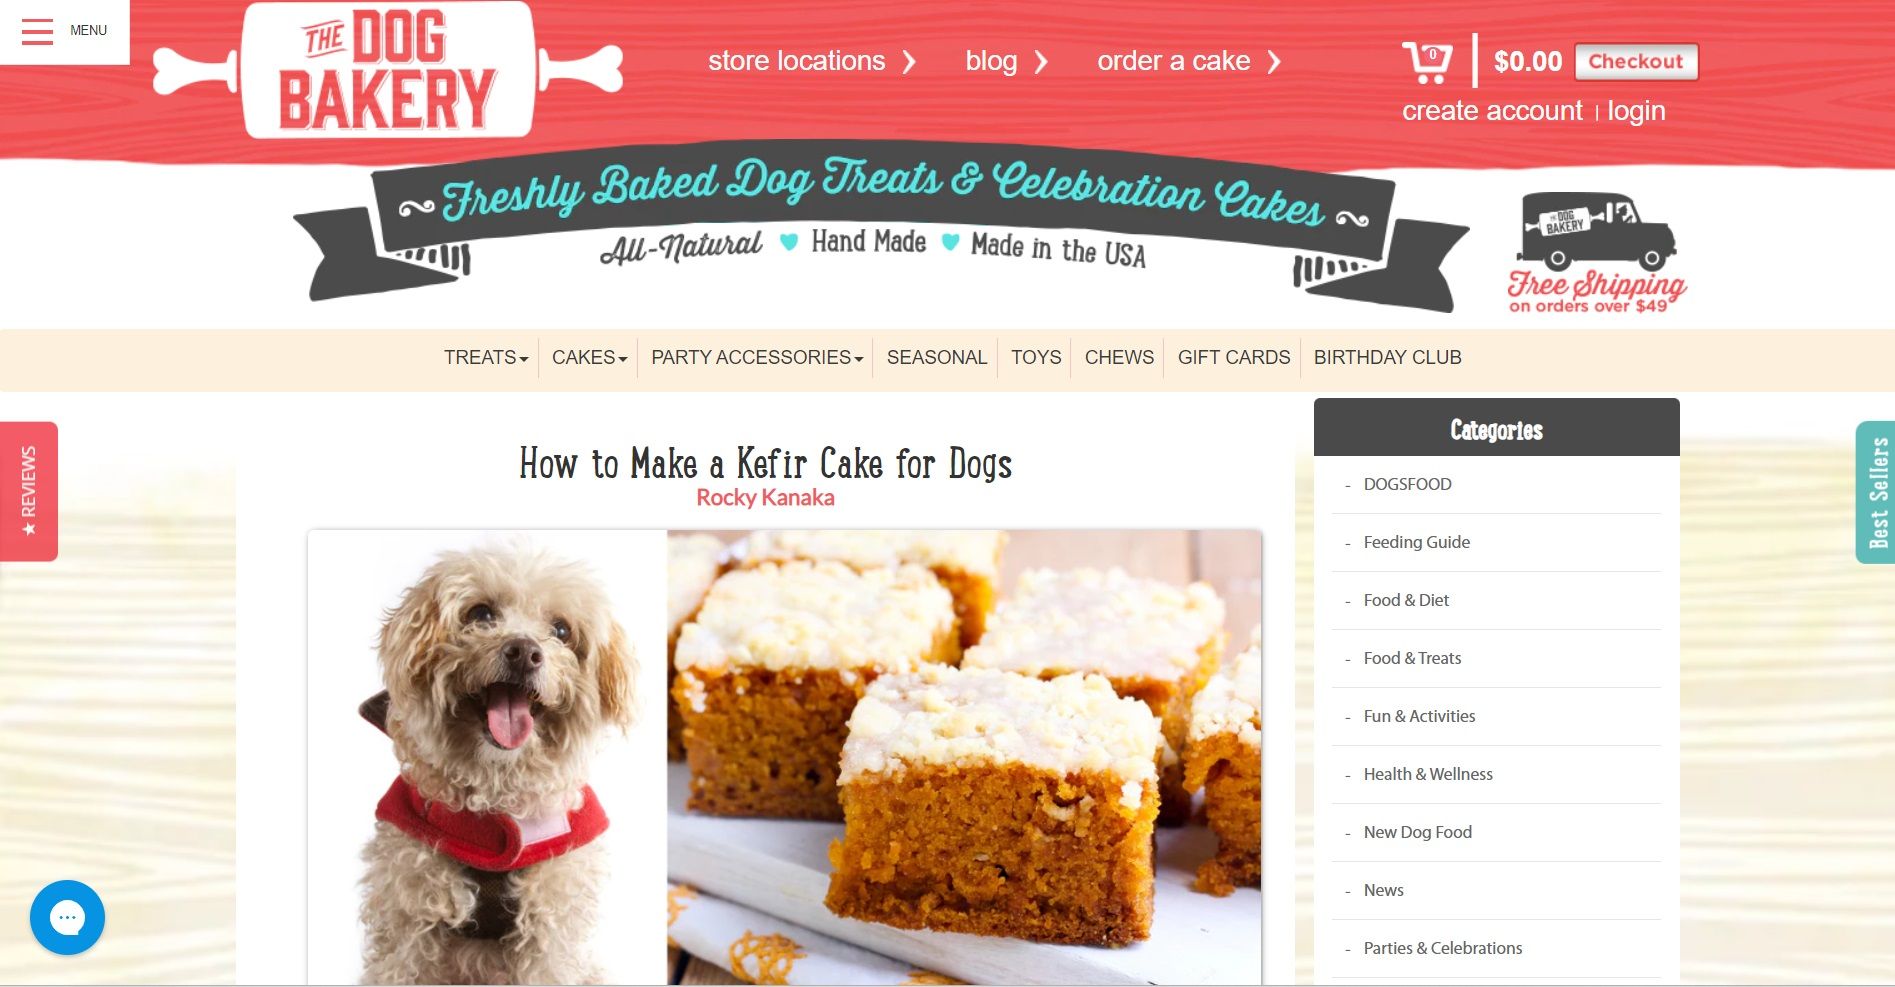 The dog bakery website page